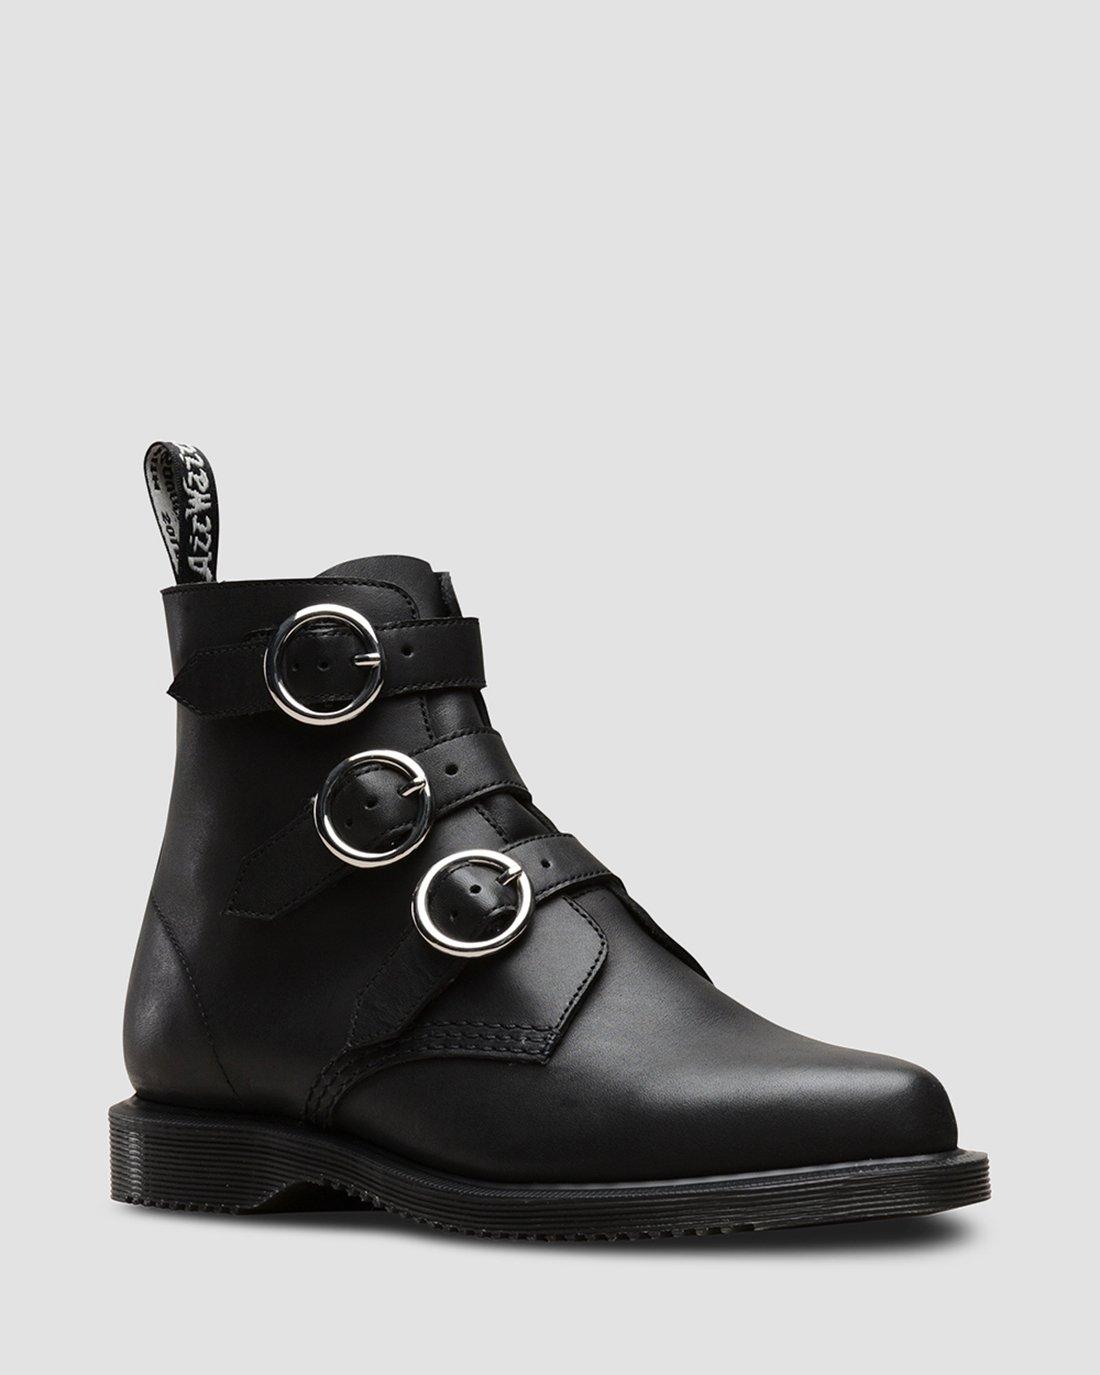 MAUDIE | Dr. Martens Official